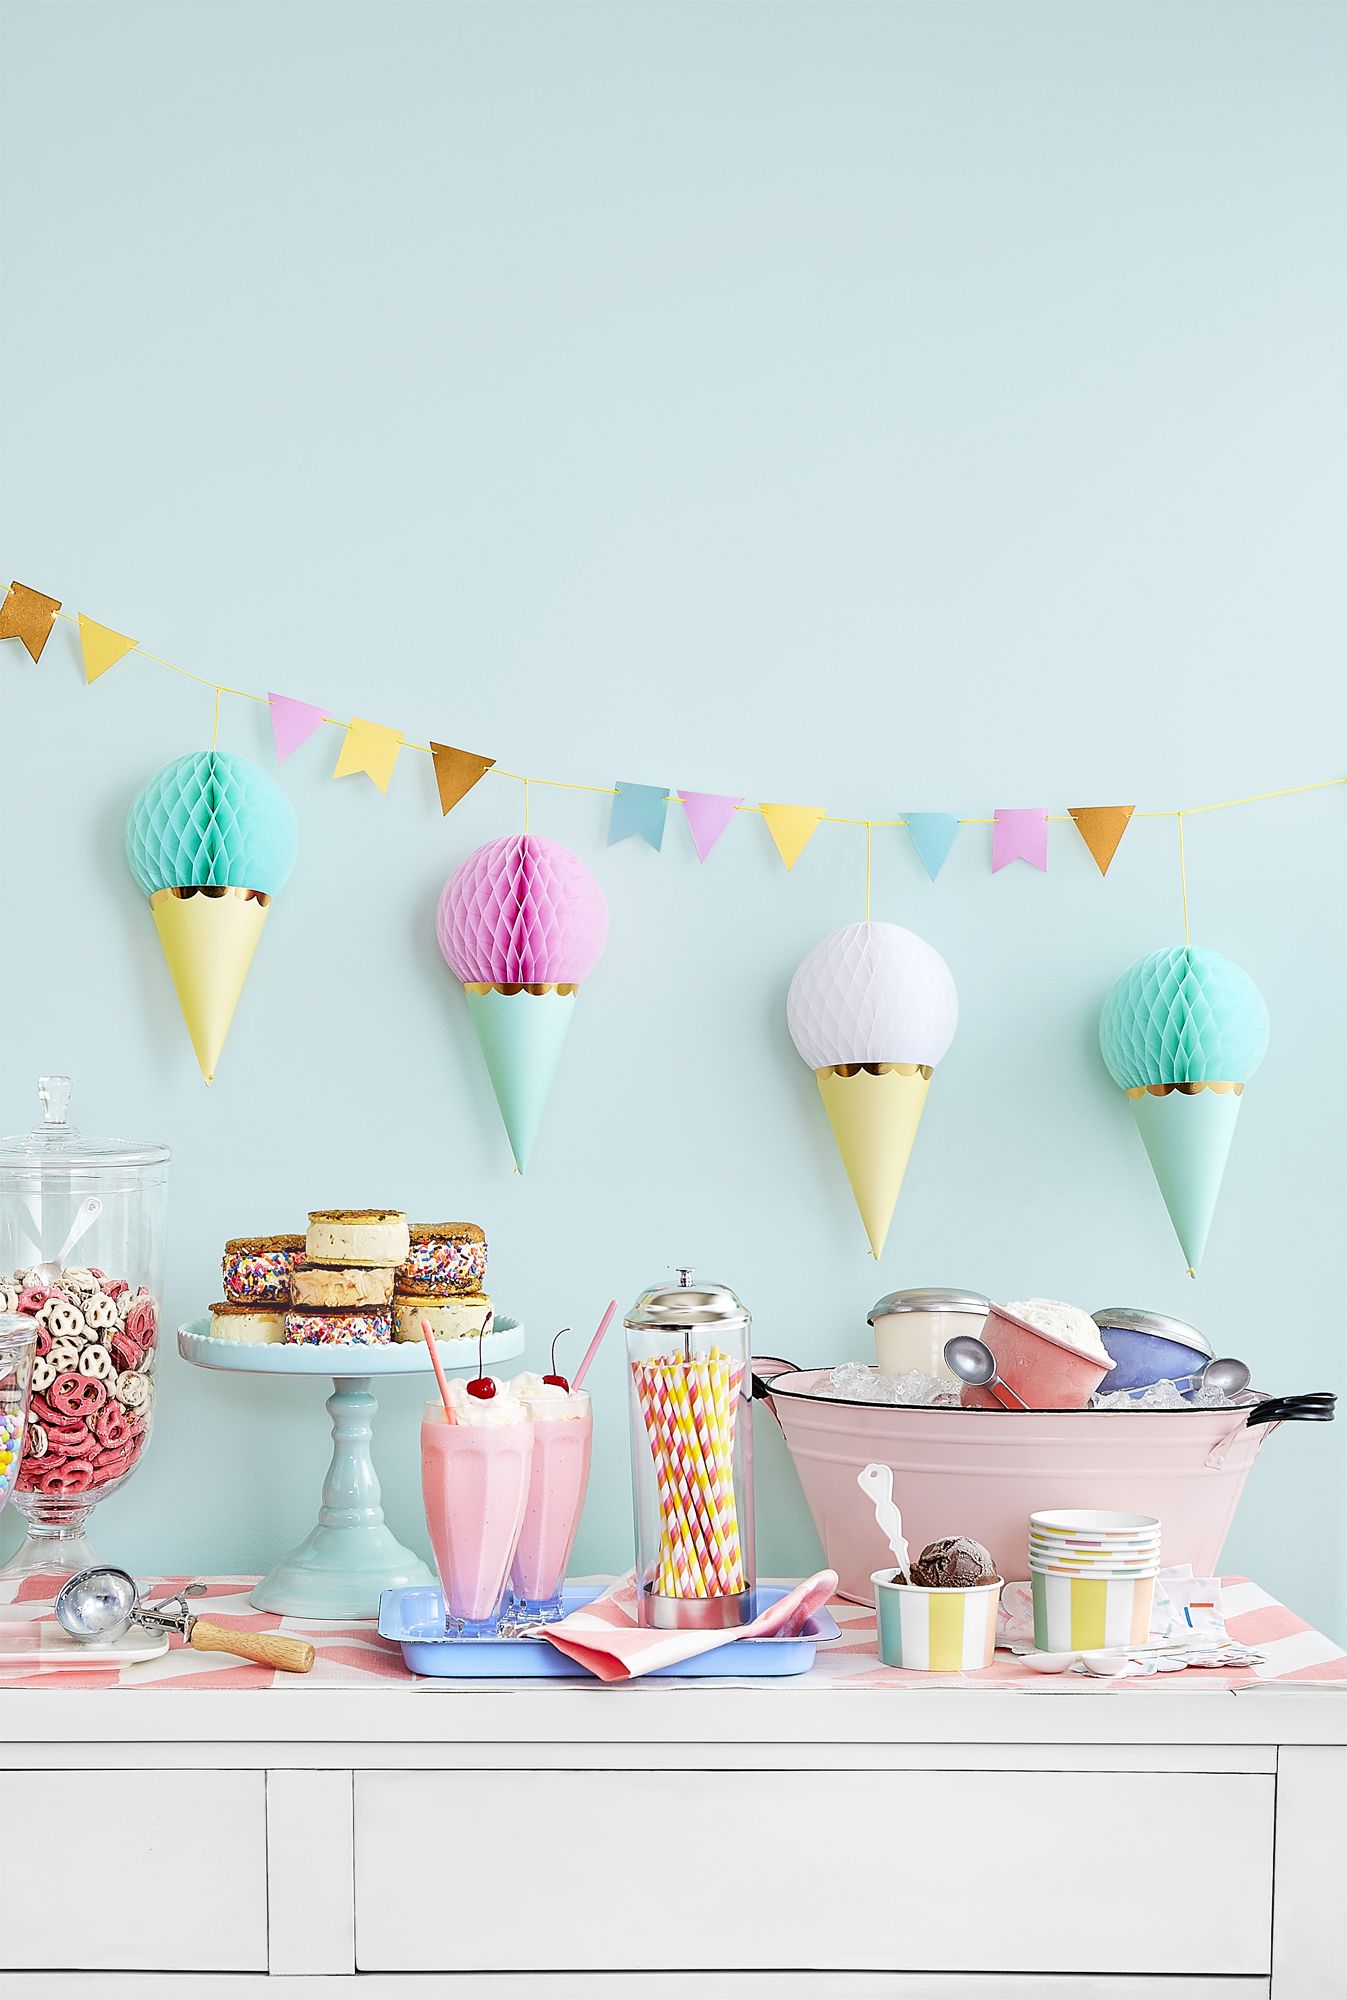 9 Unique Backdrop Ideas for Birthday Party Decorations to create